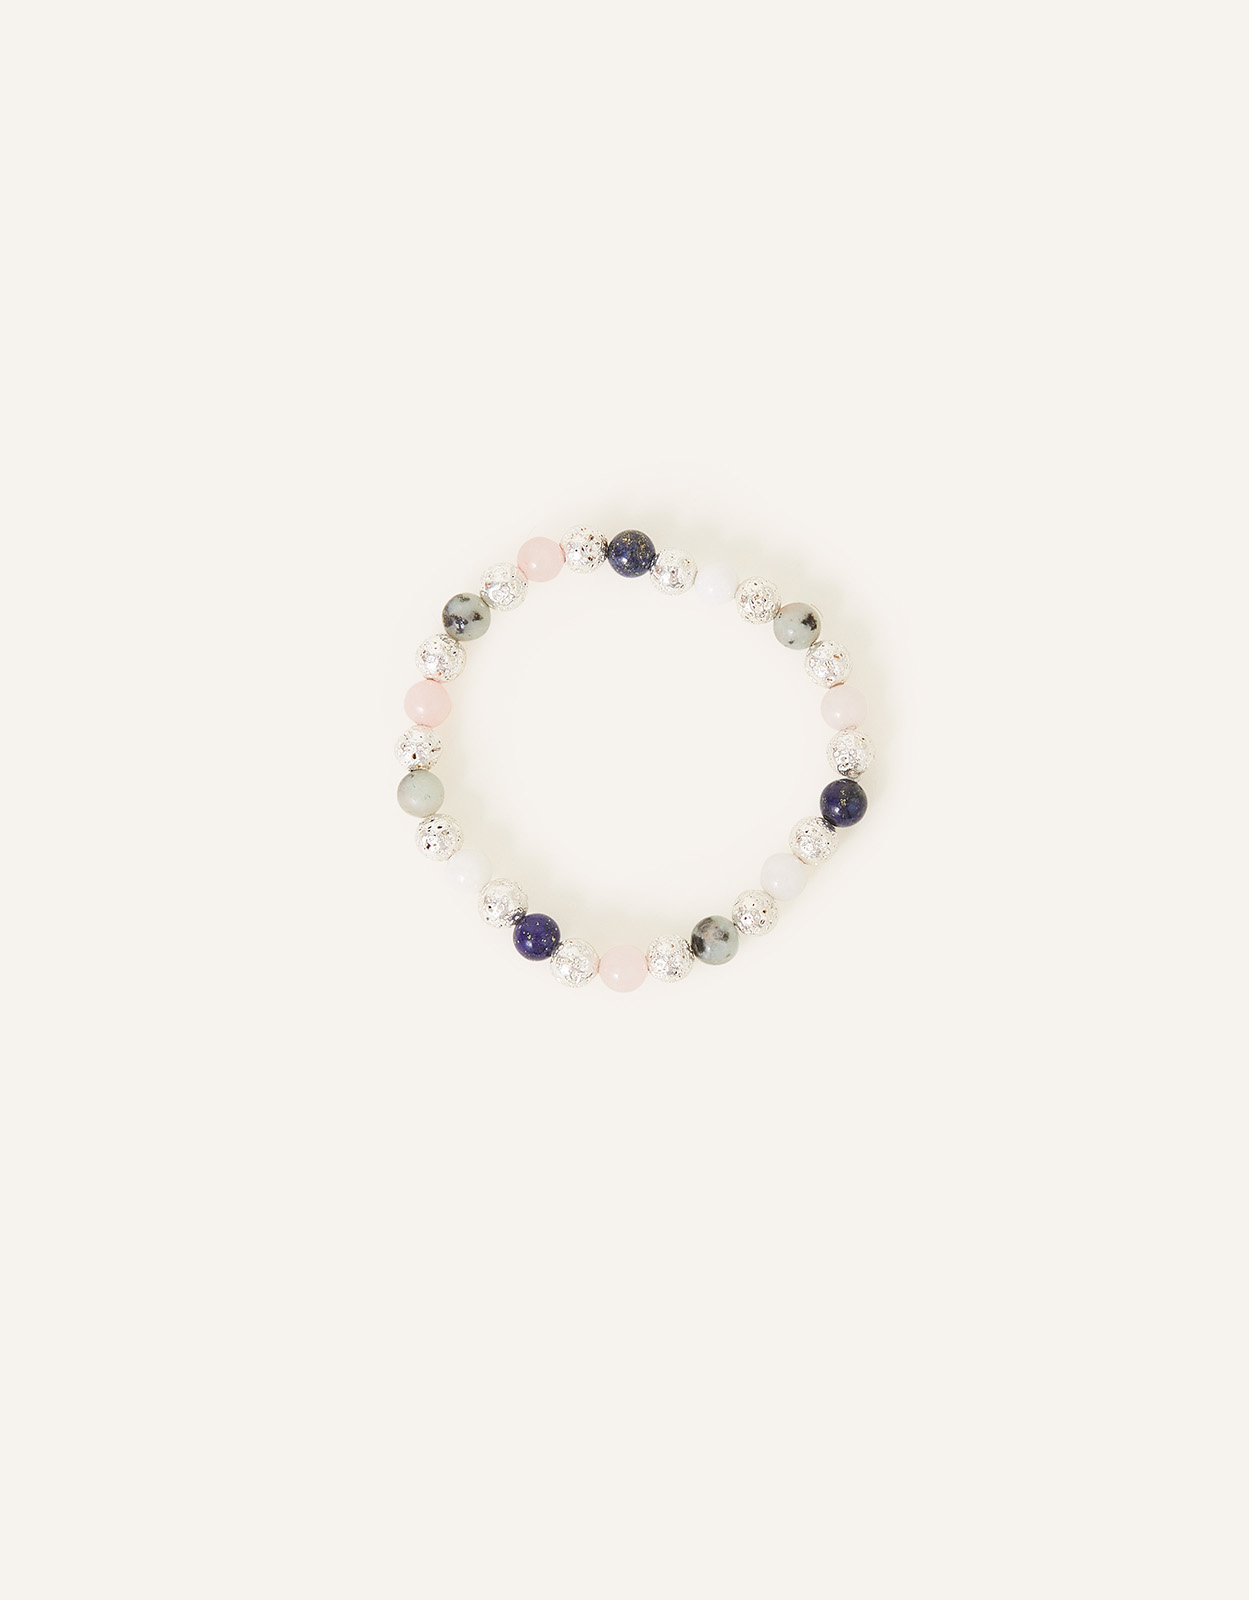 Accessorize Women's Sterling Silver-Plated, Pink and Blue Semi-Precious Stone Bracelet, Size: 7cm